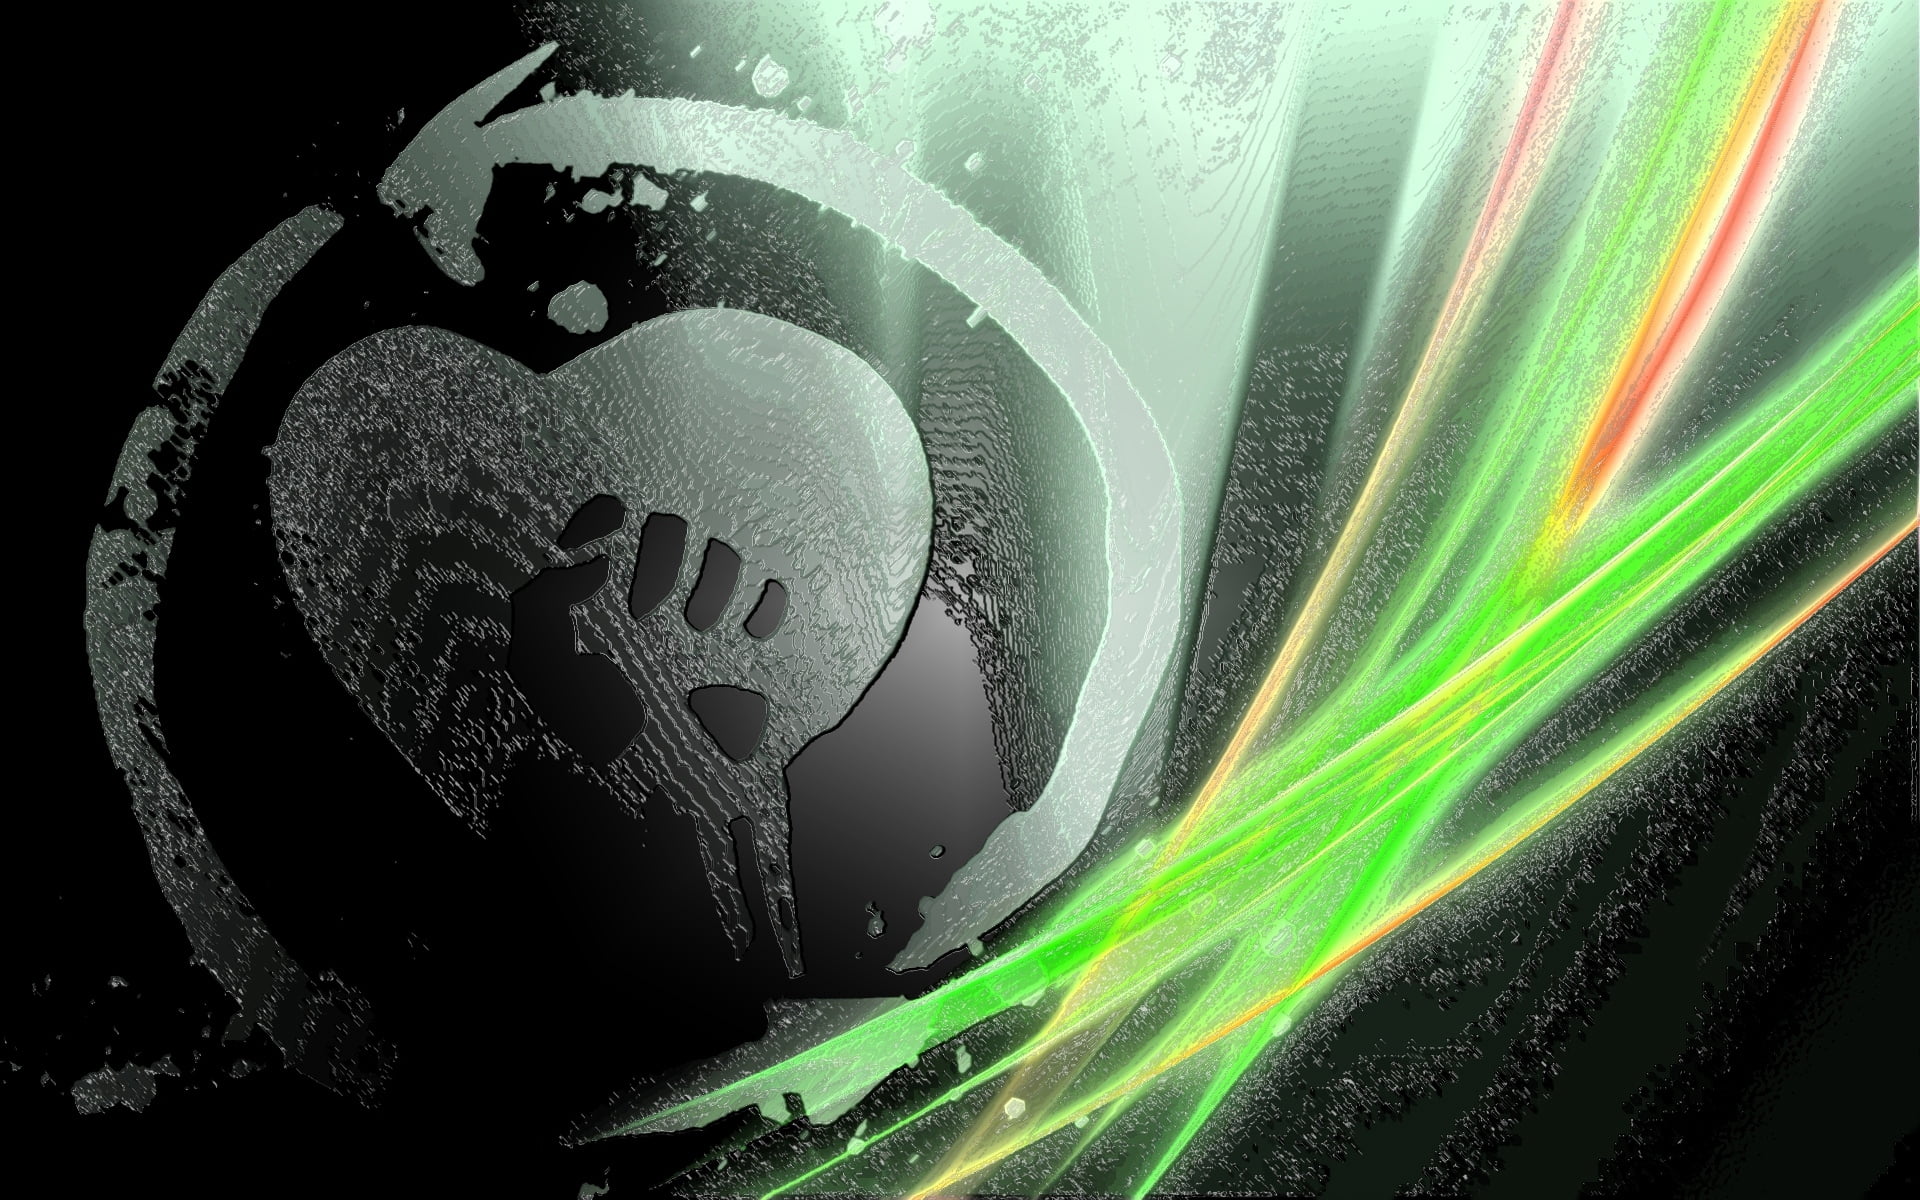 rise against, symbol, graphics, lines, colors, abstract, backgrounds